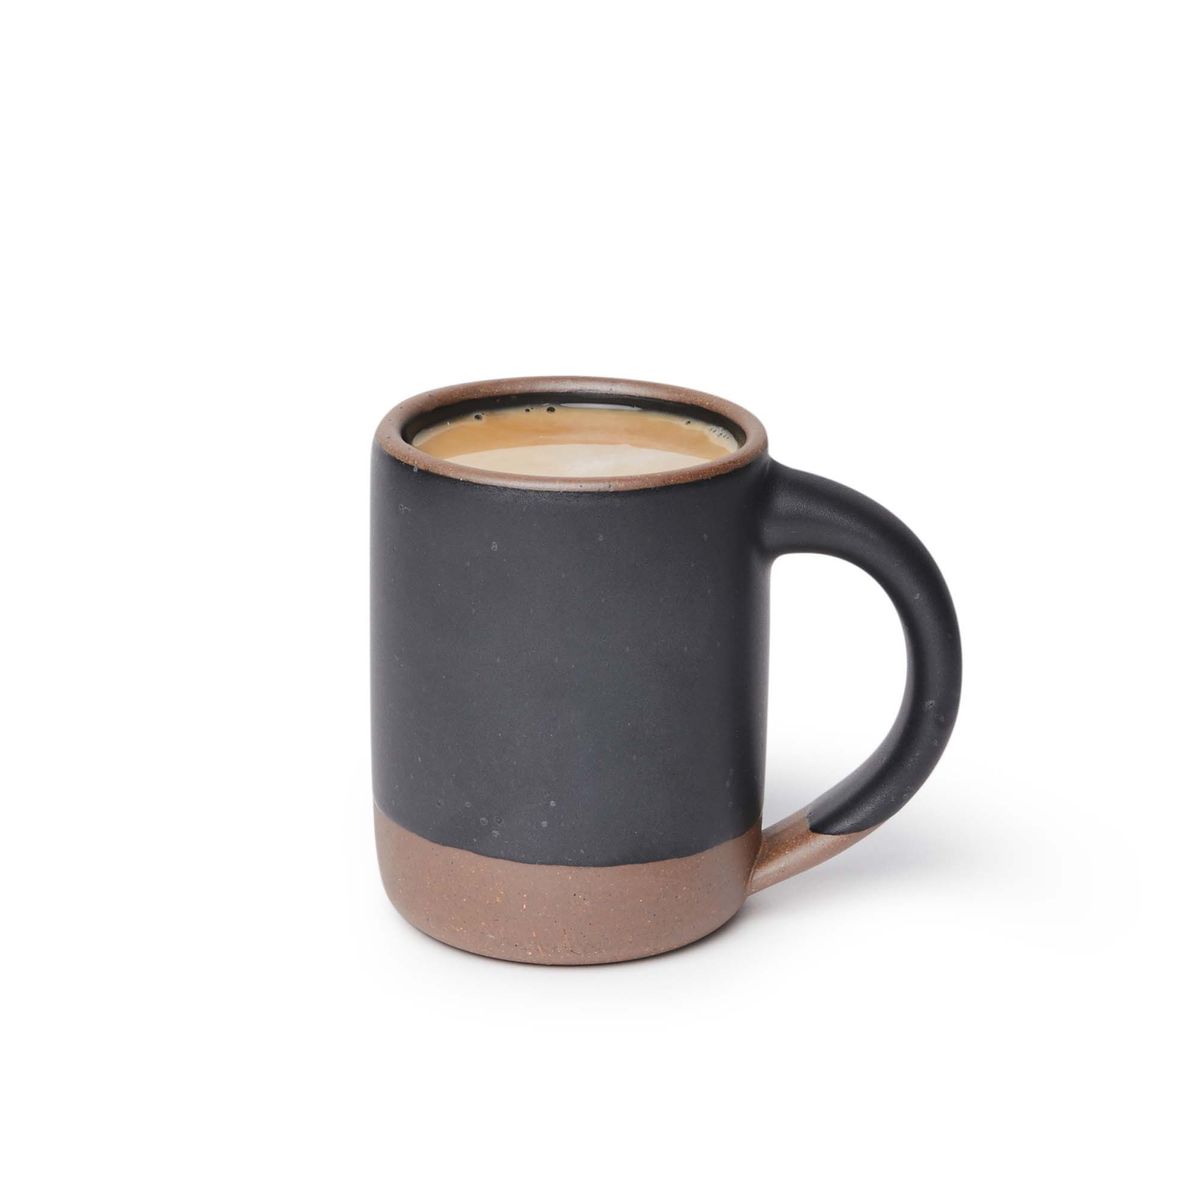 A medium sized ceramic mug filled with coffee with handle in a graphite black color featuring iron speckles and unglazed rim and bottom base.